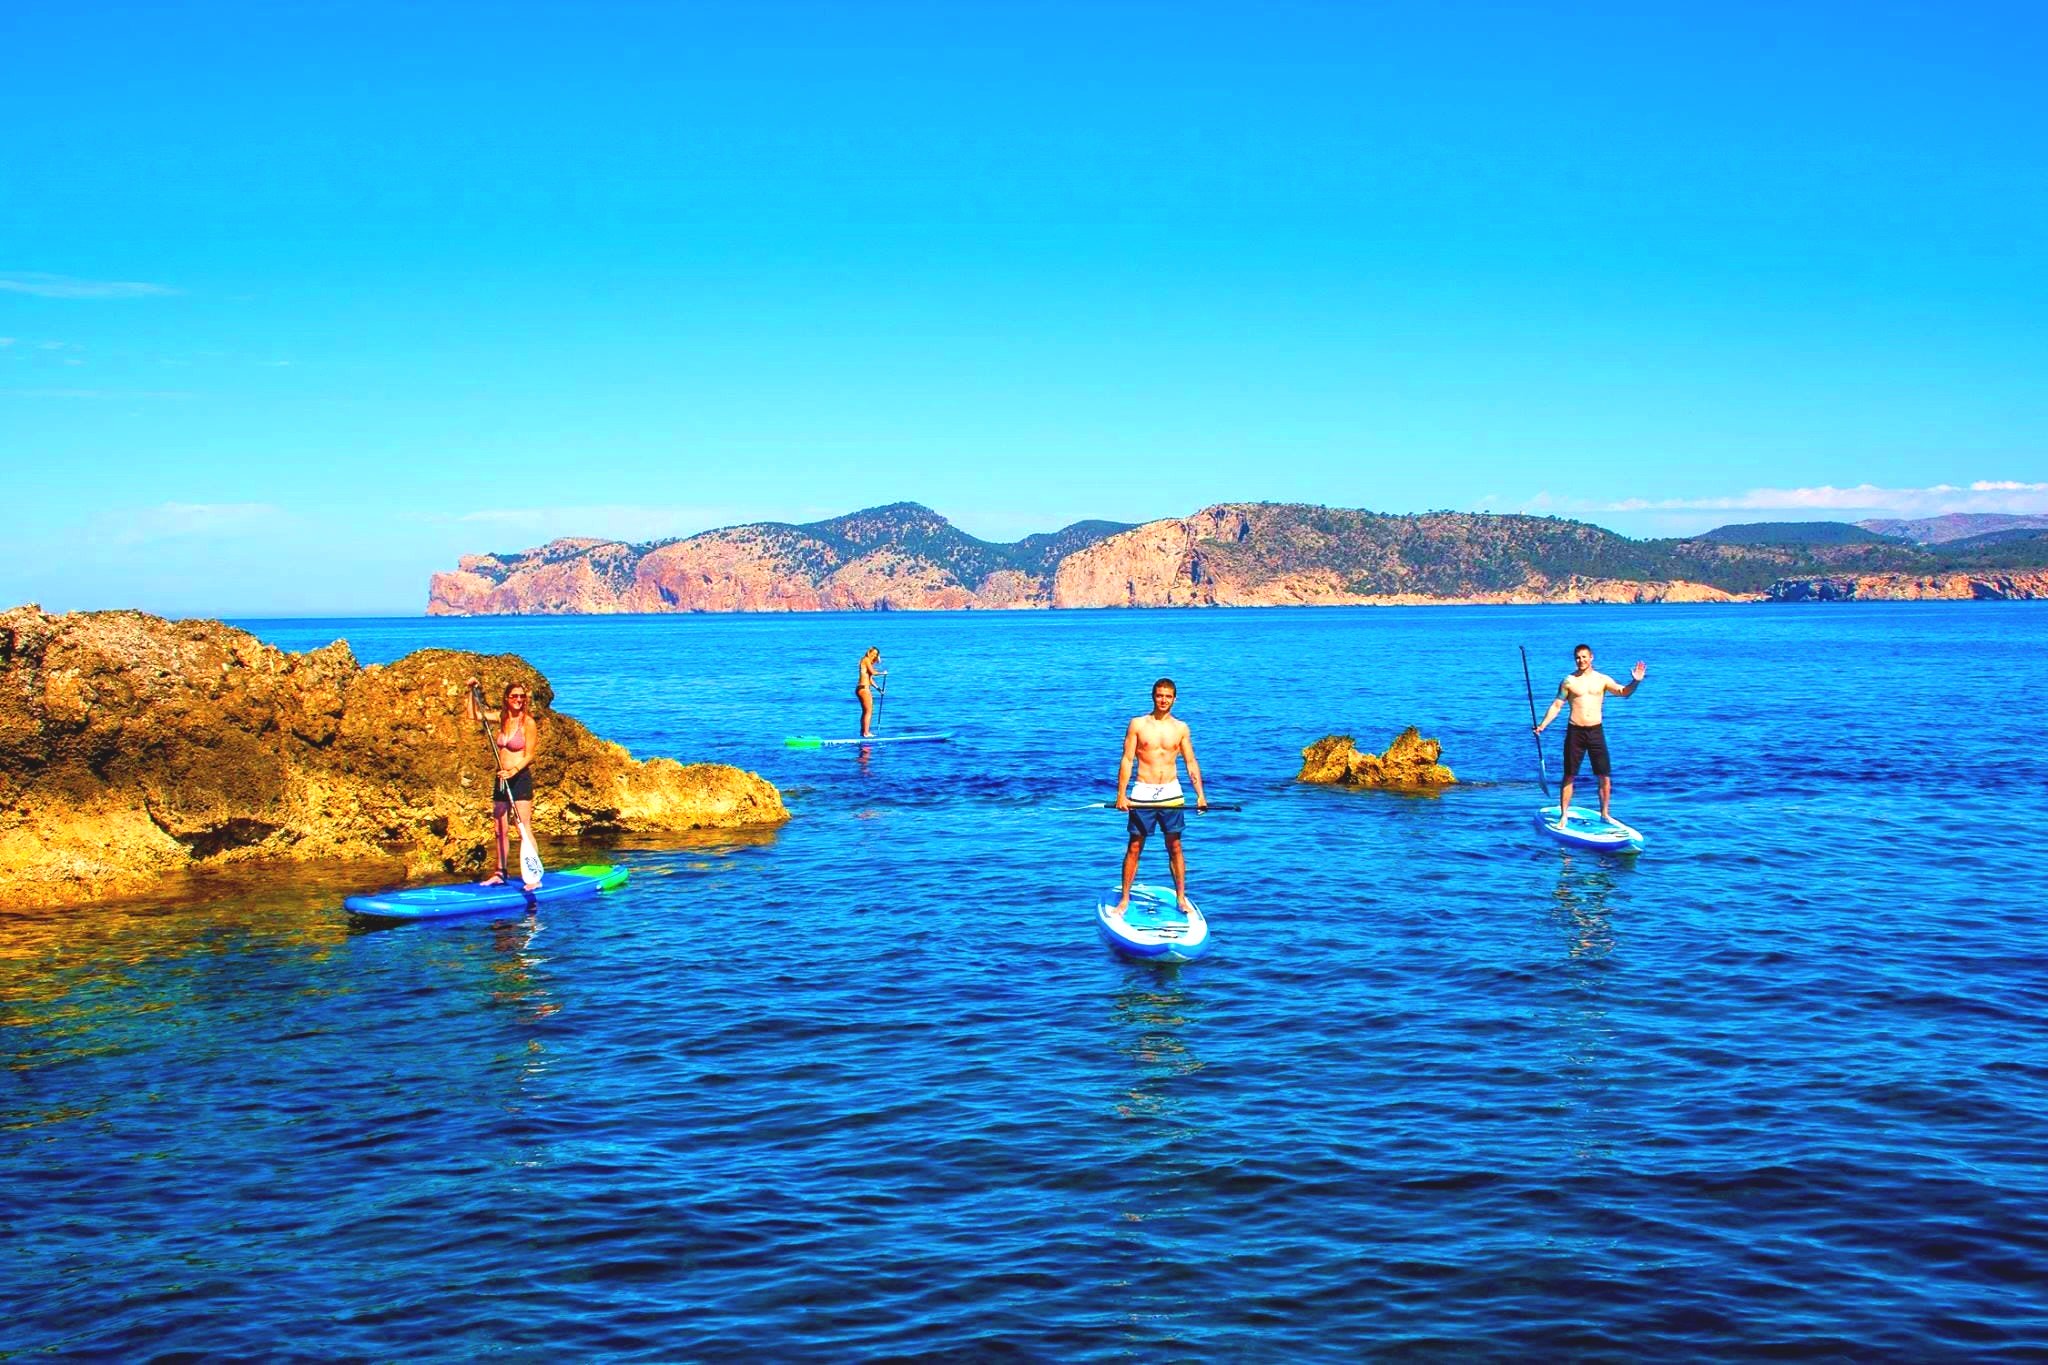 Some guys are taking part in a SUP tour in Mallorca.